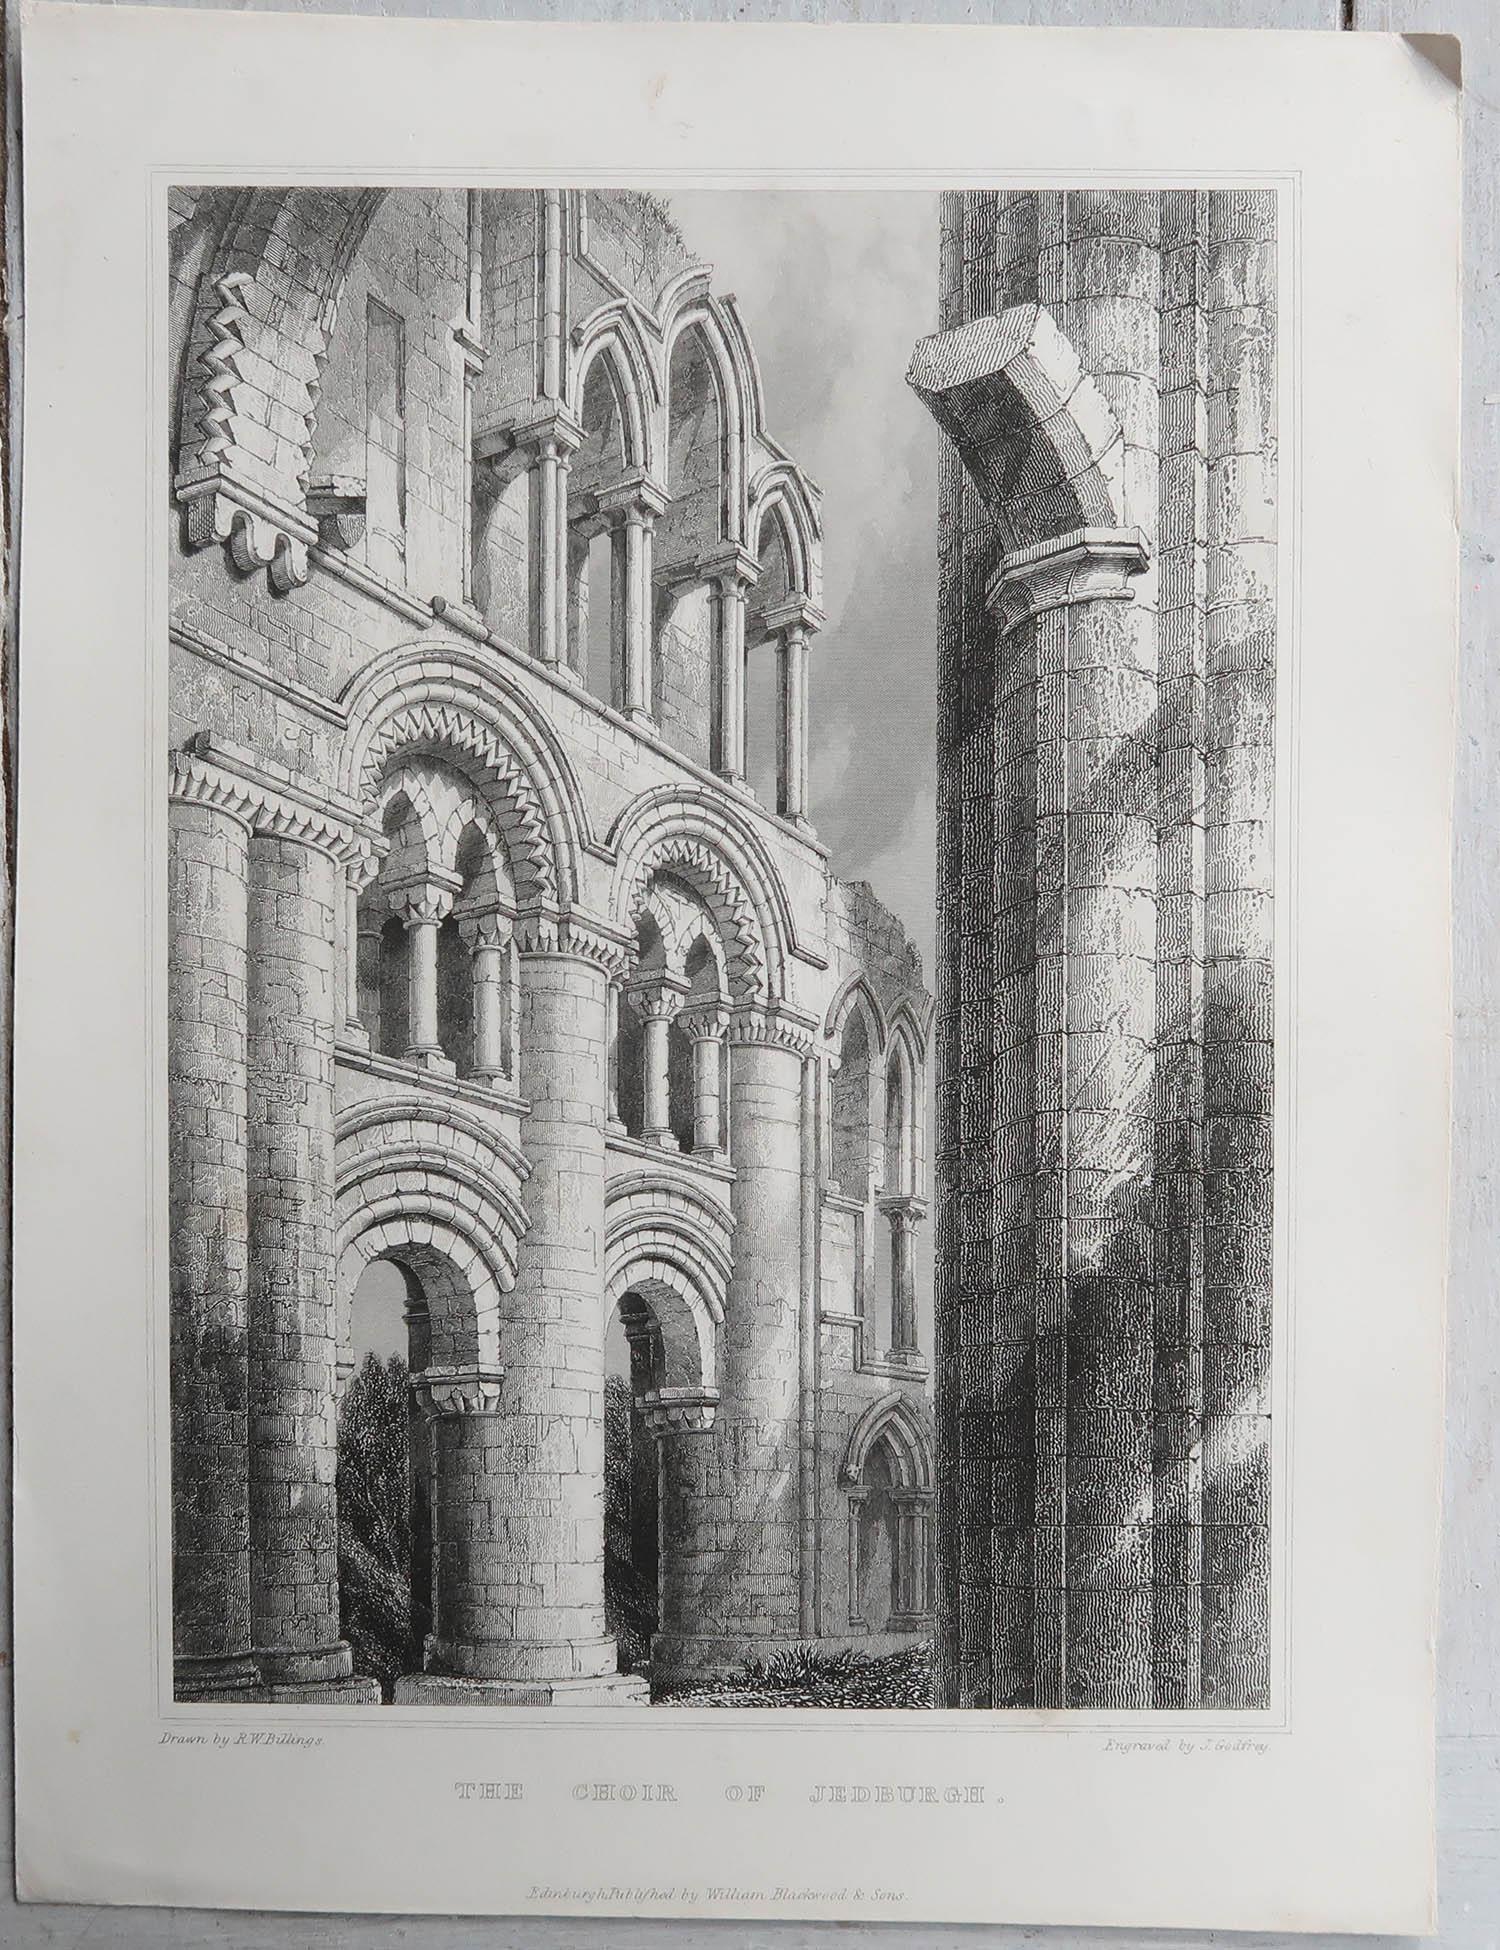 Glorious set of 18 prints of Gothic Architecture, mainly in Scotland

Steel engravings. After R.W. Billings

Published by William Blackwood & Sons, Edinburgh. Dated 1848

Unframed.







